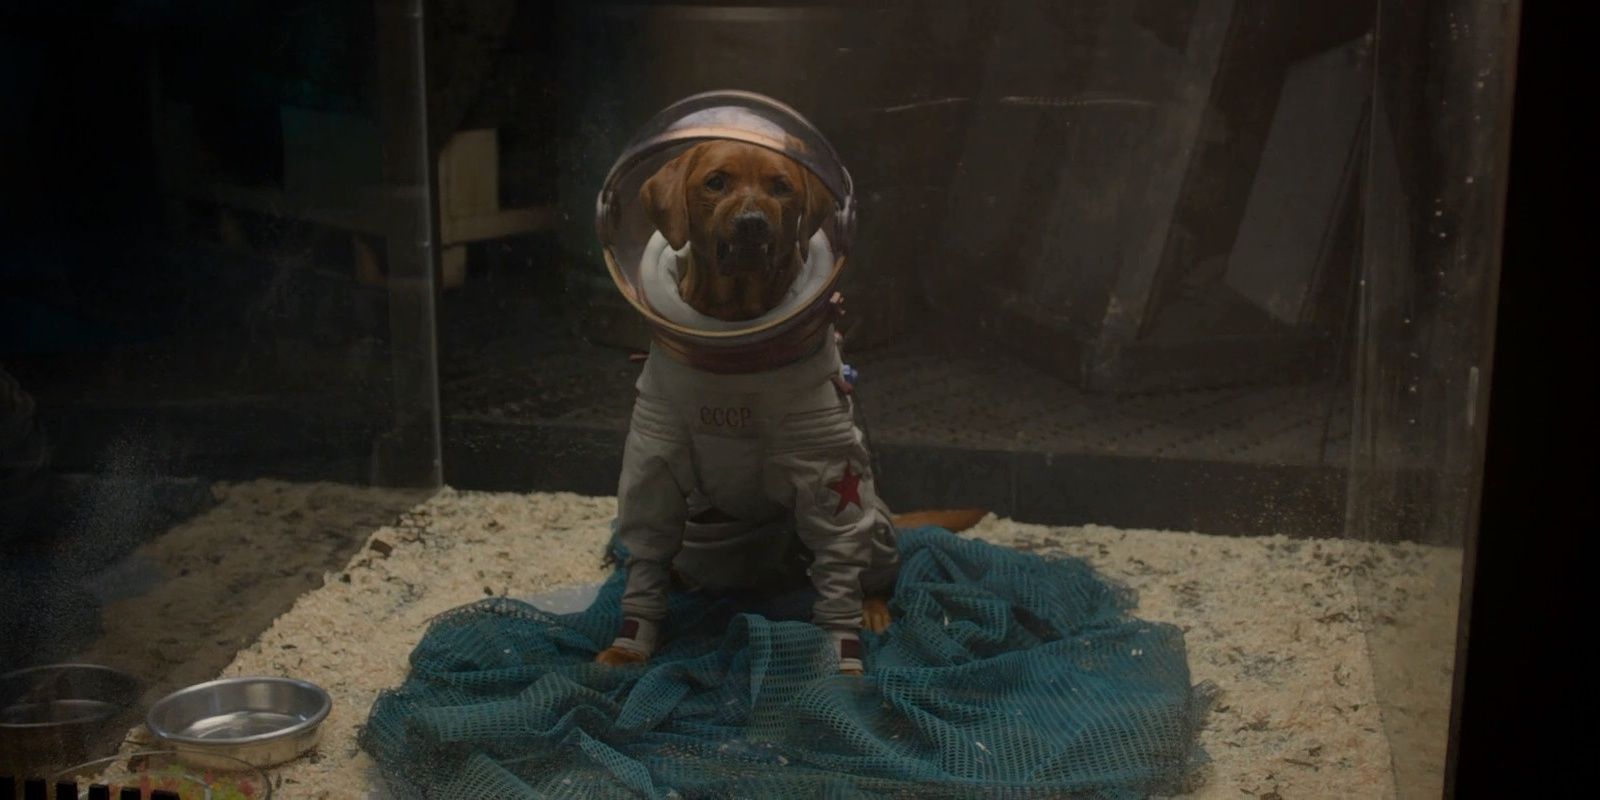 Cosmo in Guardians of the Galaxy